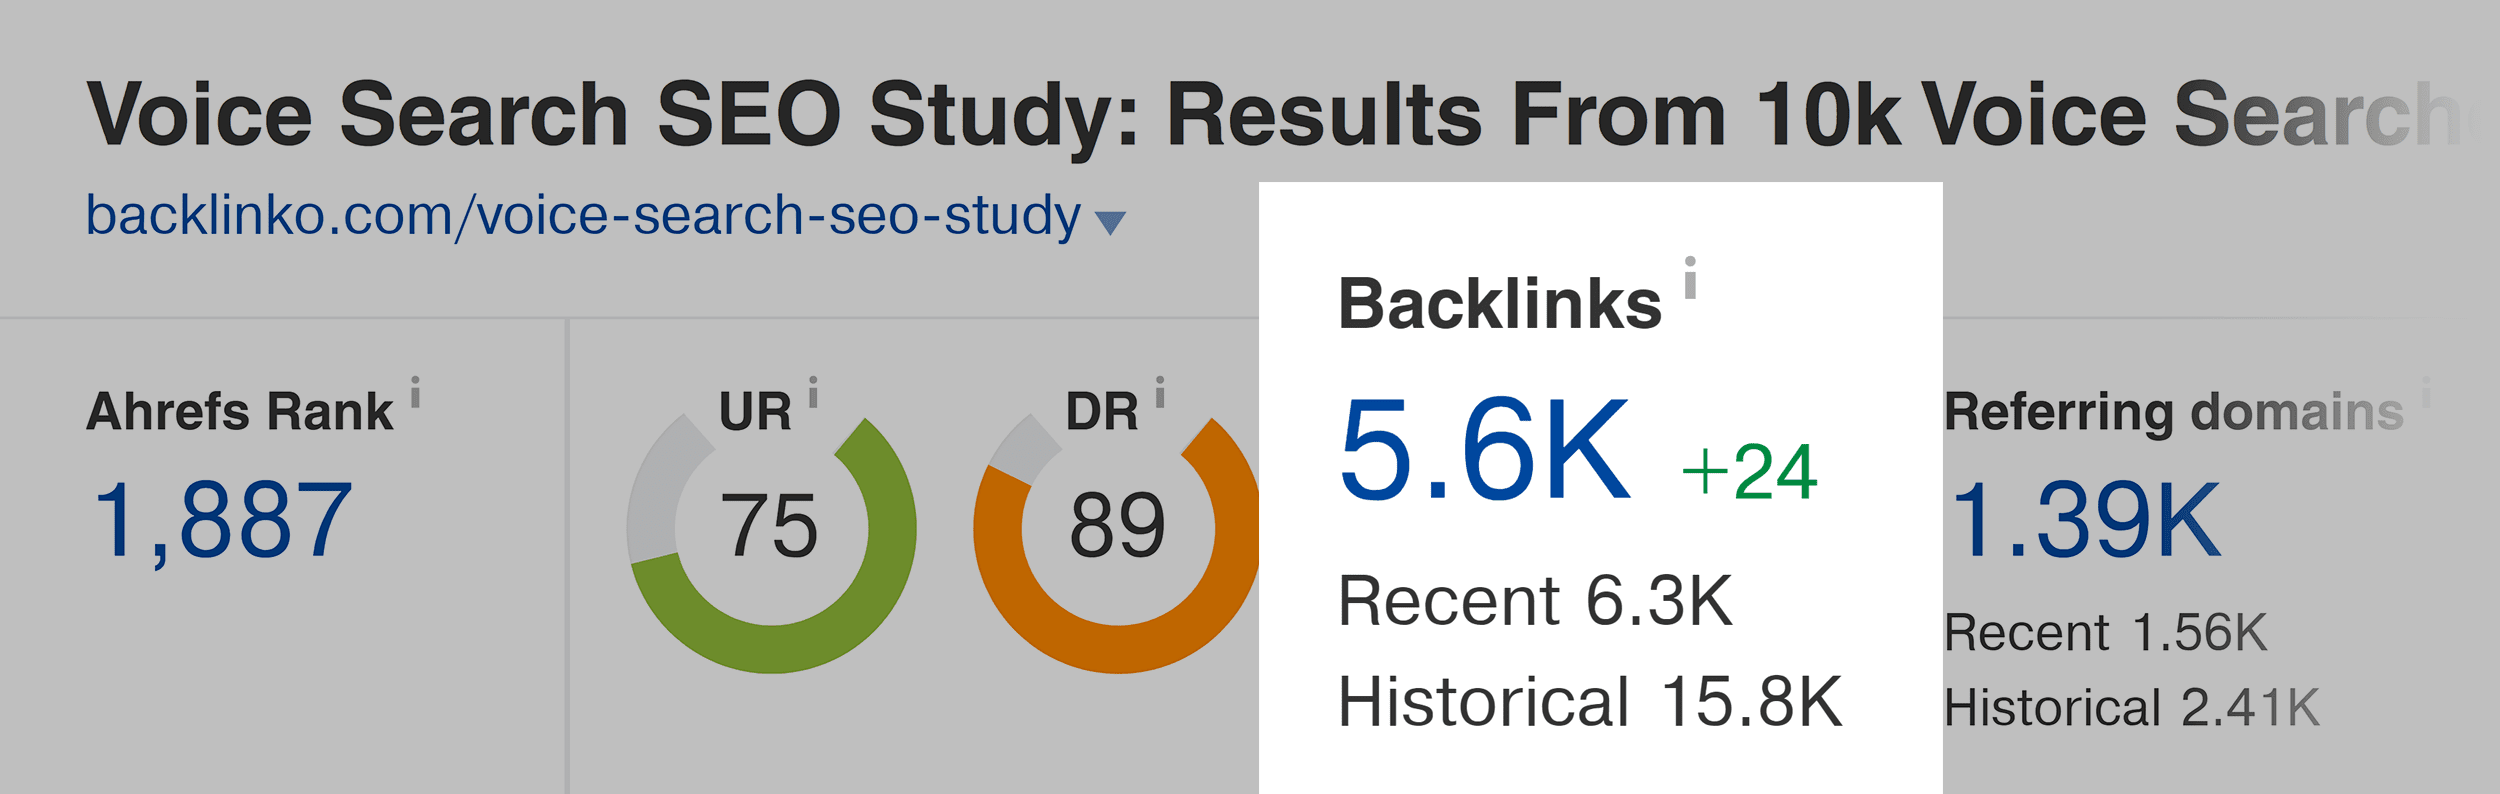 voice-search-seo-study-backlinks-1